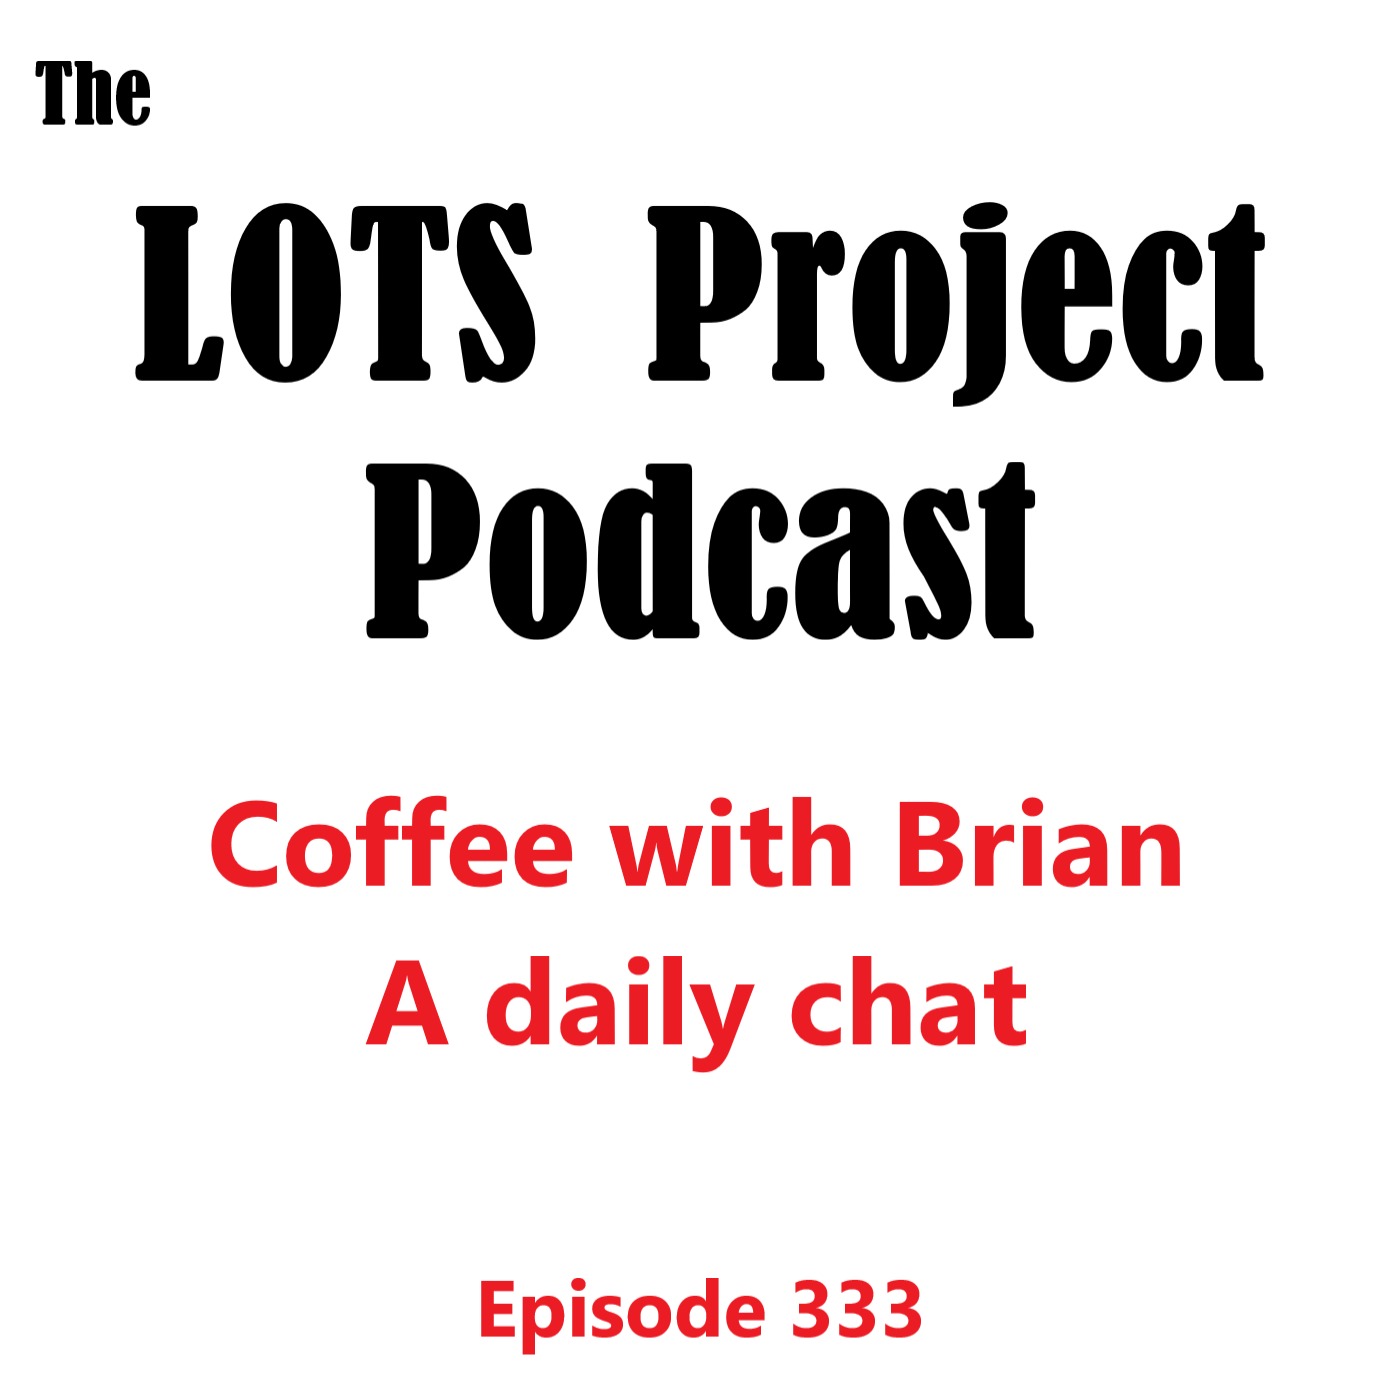 Episode 333 Coffee with Brian, A Daily Morning Chat #podcast #daily #nomad #coffee